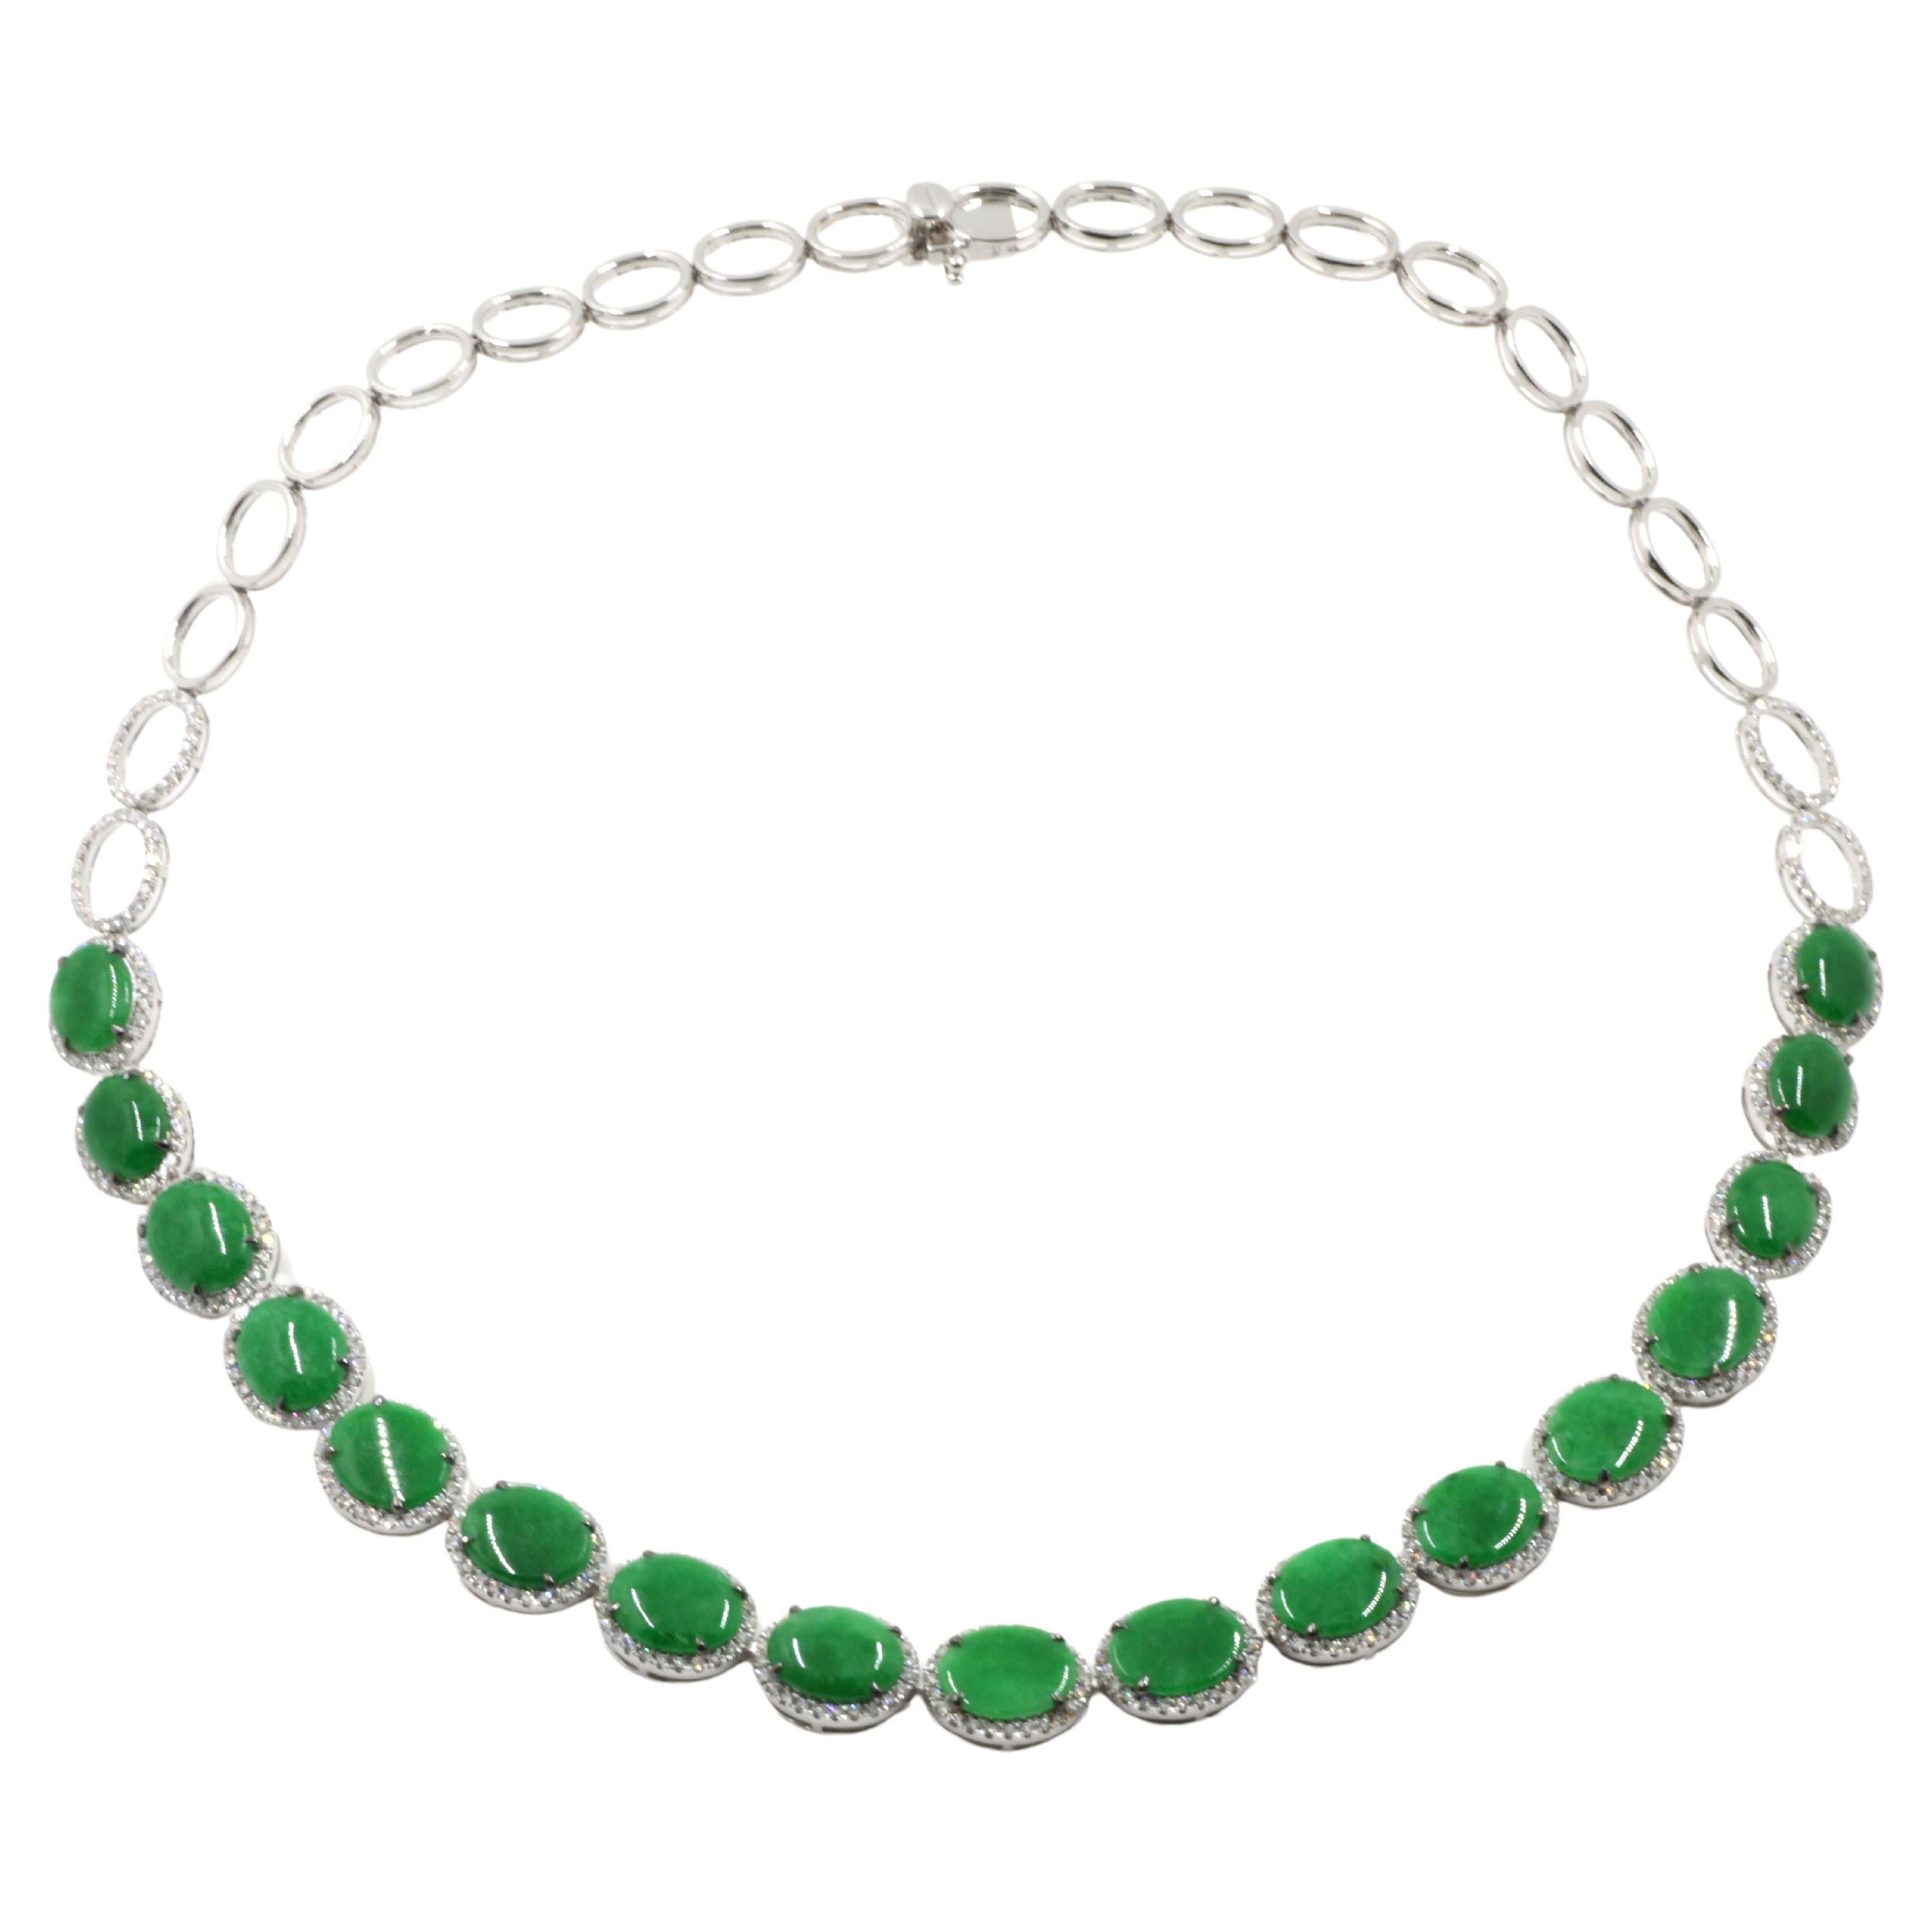 Introducing our exquisite Vintage Apple Green Color Jadeite Burmese Jade and Diamond Choker Necklace in 18 Karat White Gold. This stunning piece of jewelry exudes elegance and sophistication, capturing the essence of timeless beauty. The necklace